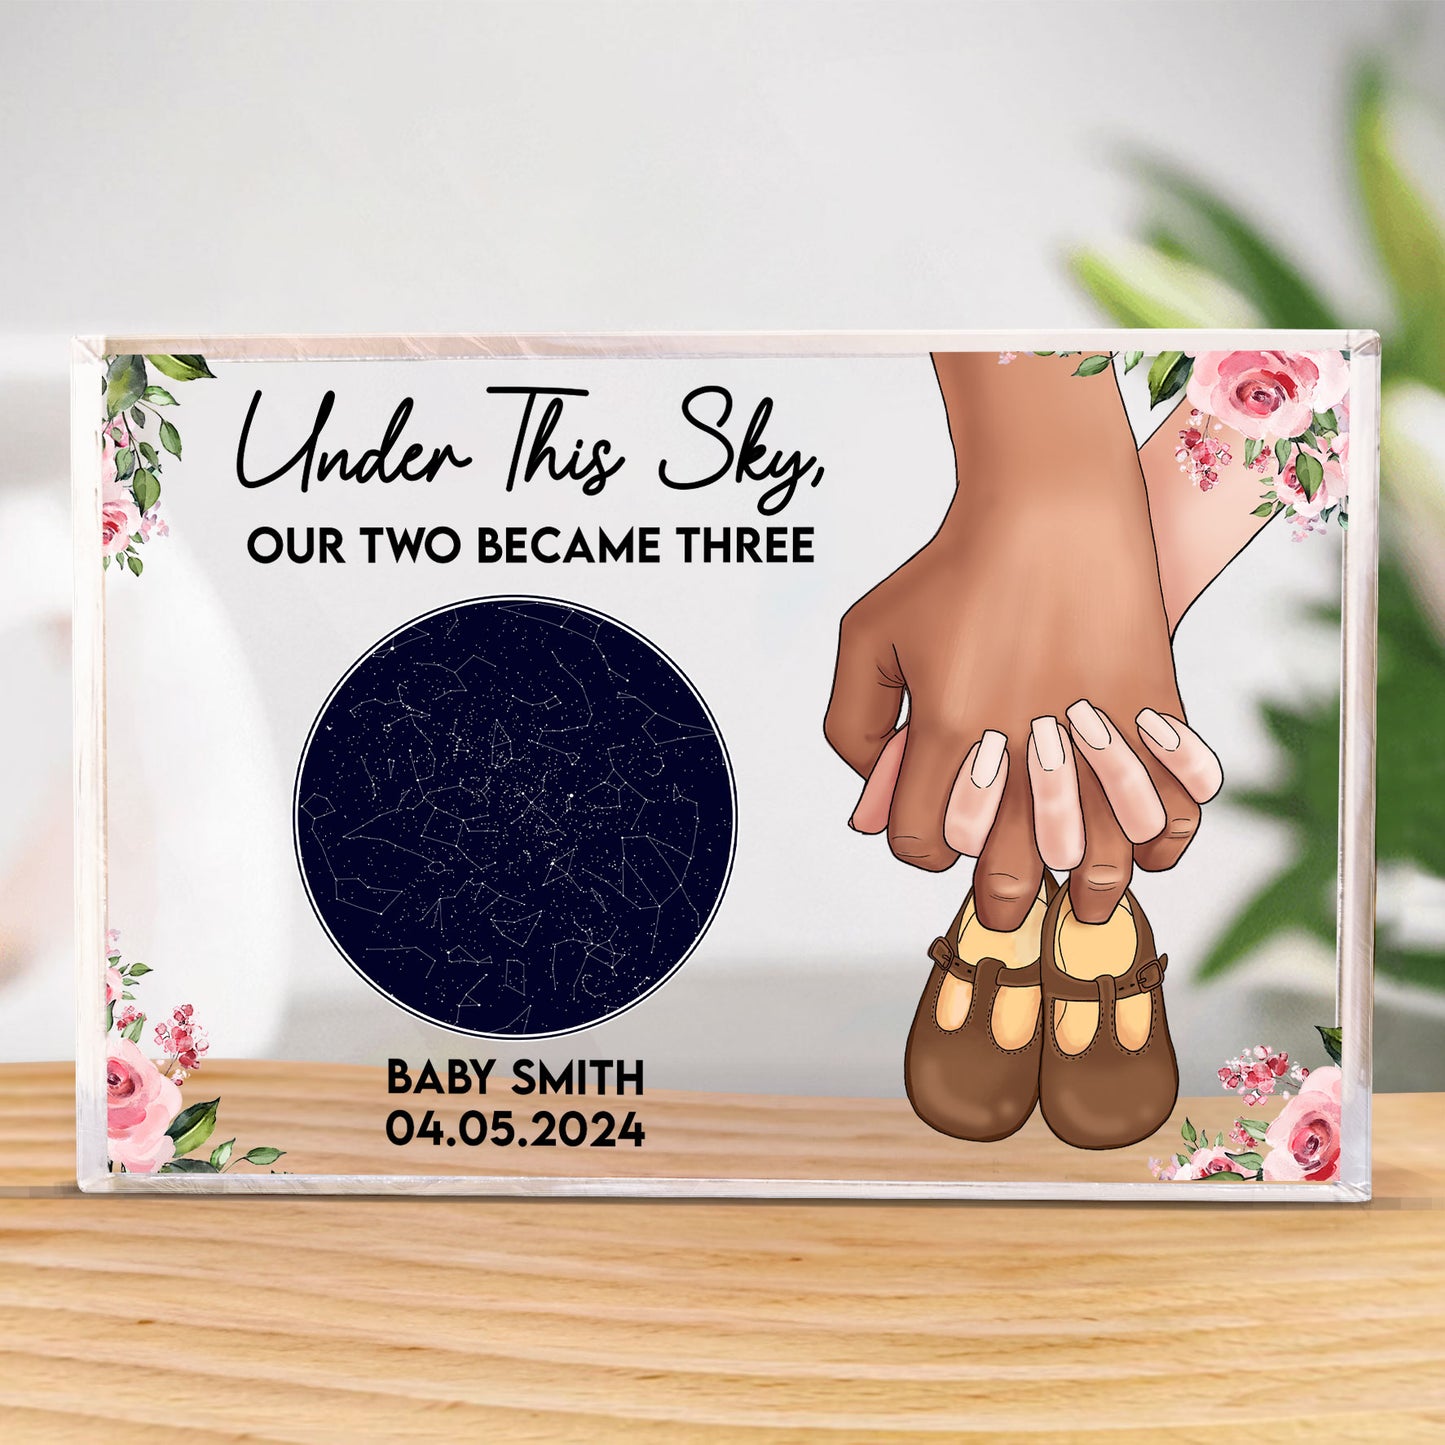 Under This Sky, Our Two Became Three - Personalized Acrylic Plaque - Star Map